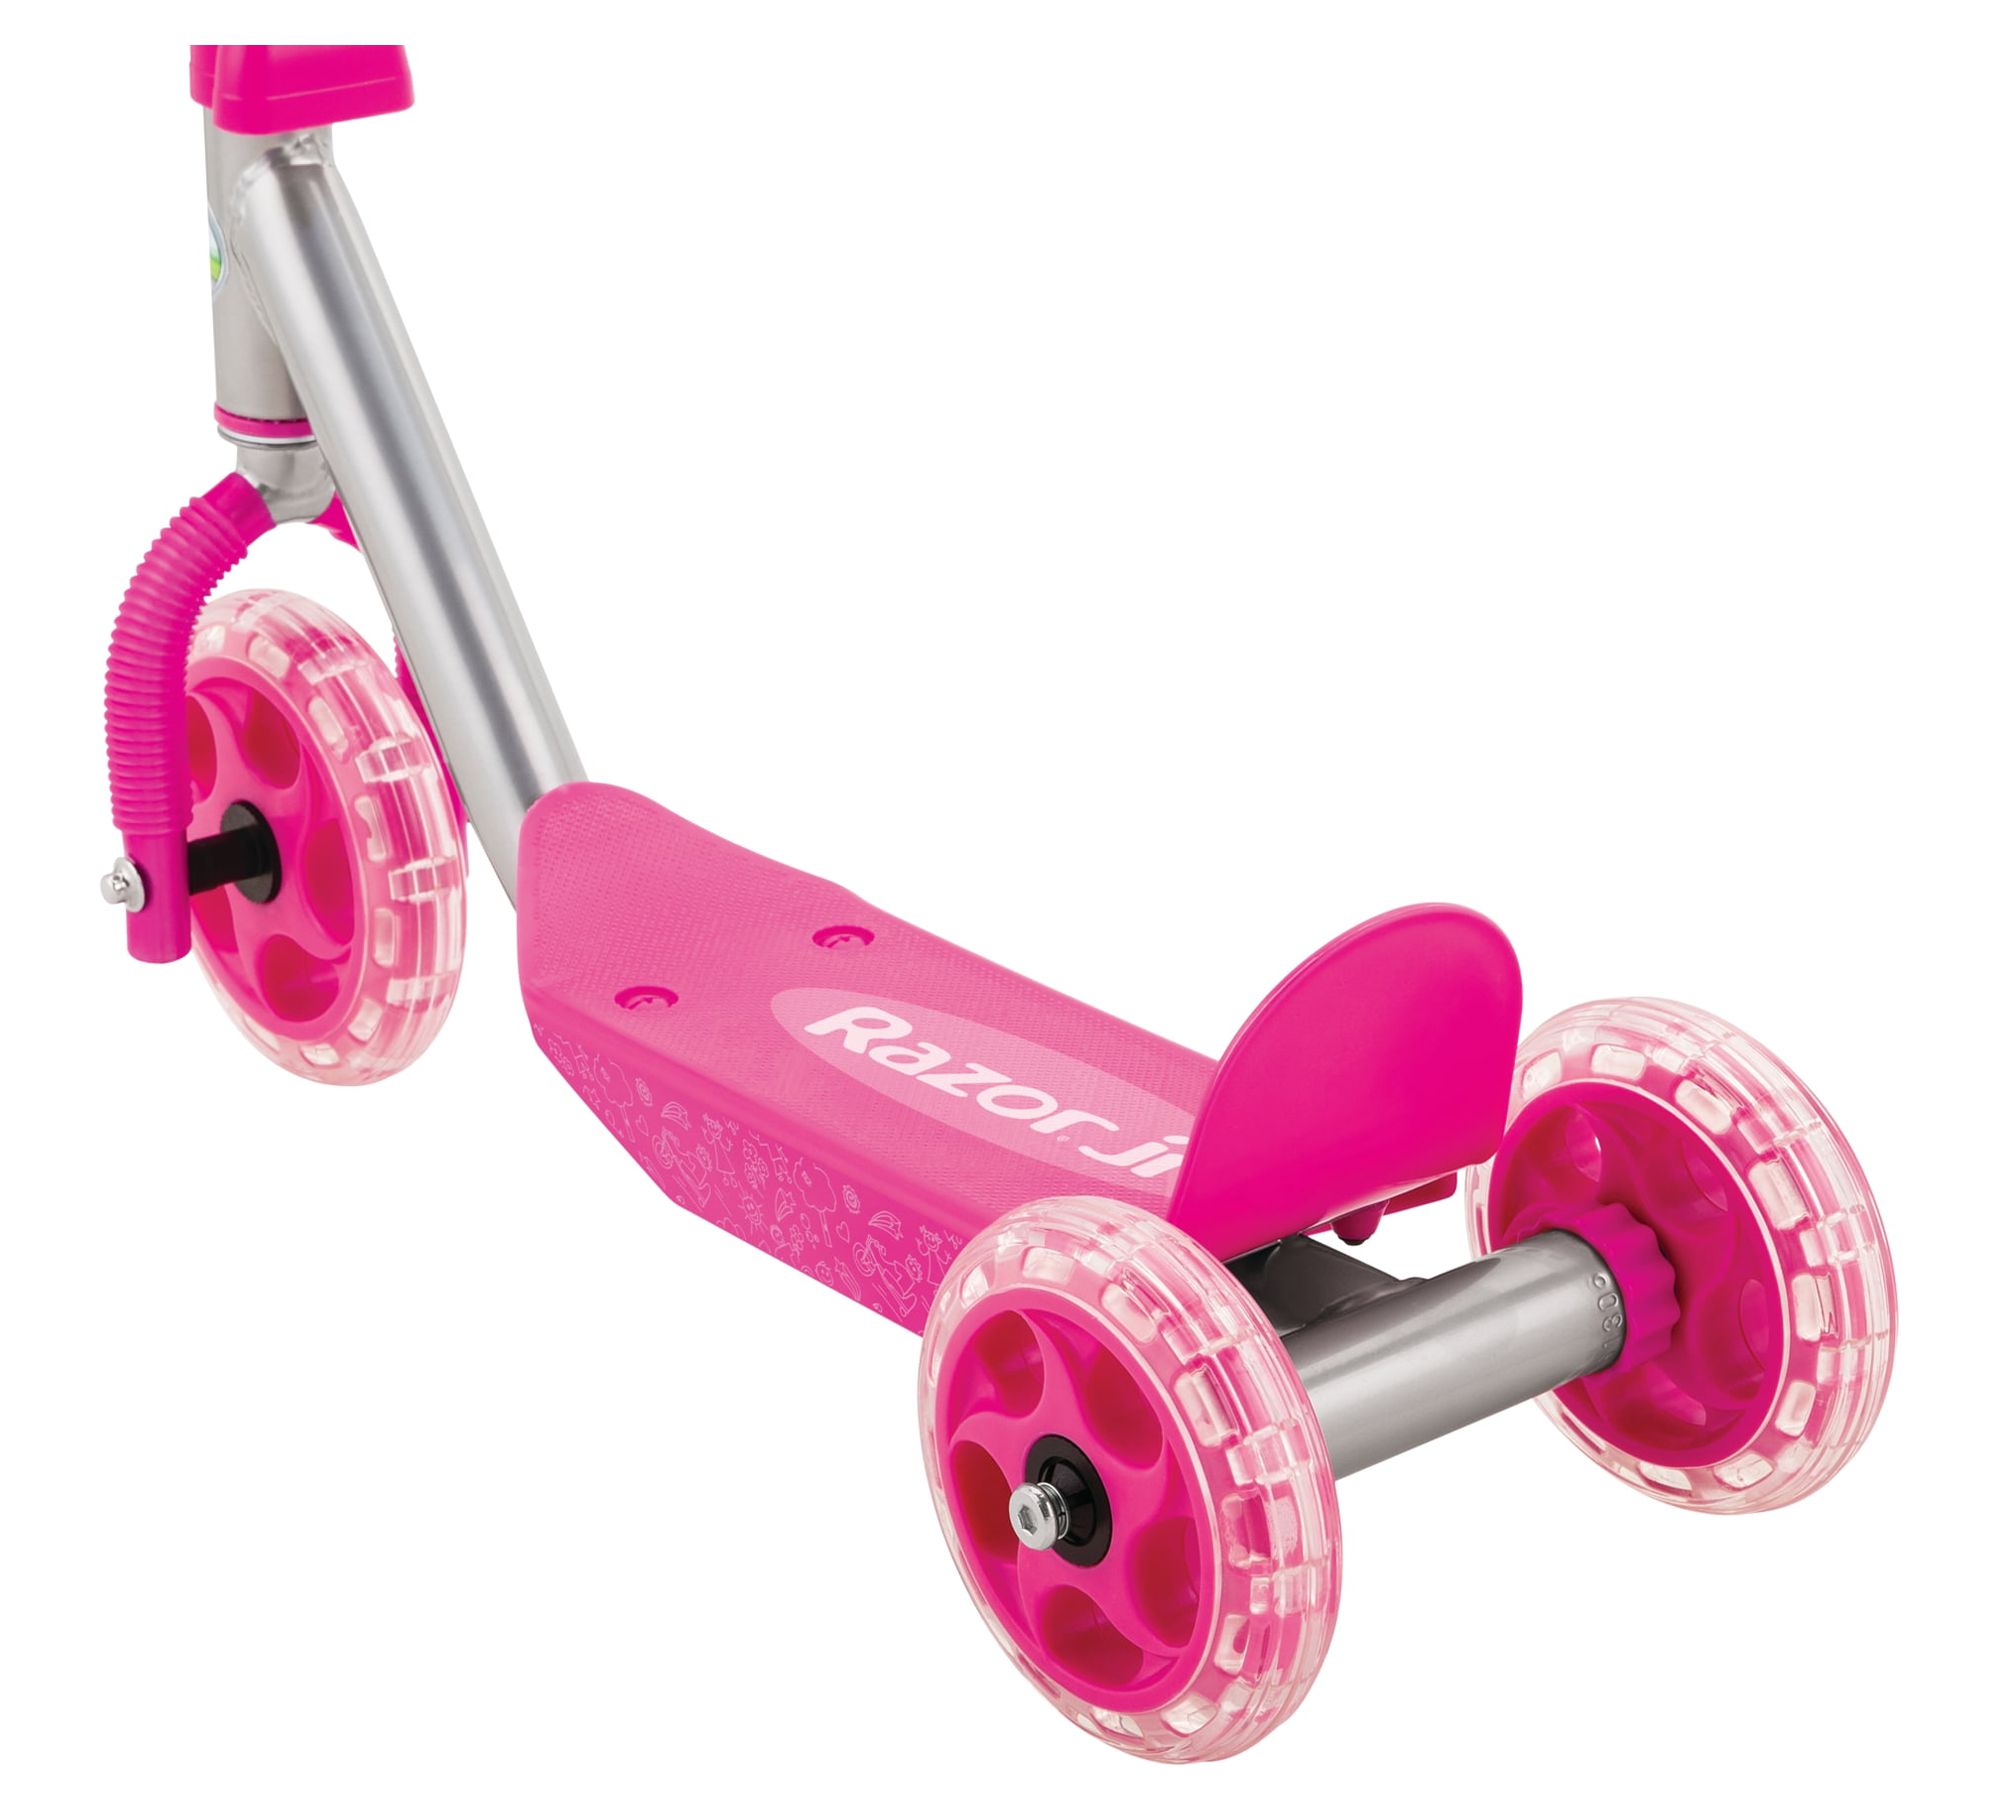 Razor Jr. Lil' Kick - 3-wheel Kick Scooter for Younger Children (Ages 3+), Max Rider Weight 44 lb (20 kg) - image 3 of 3